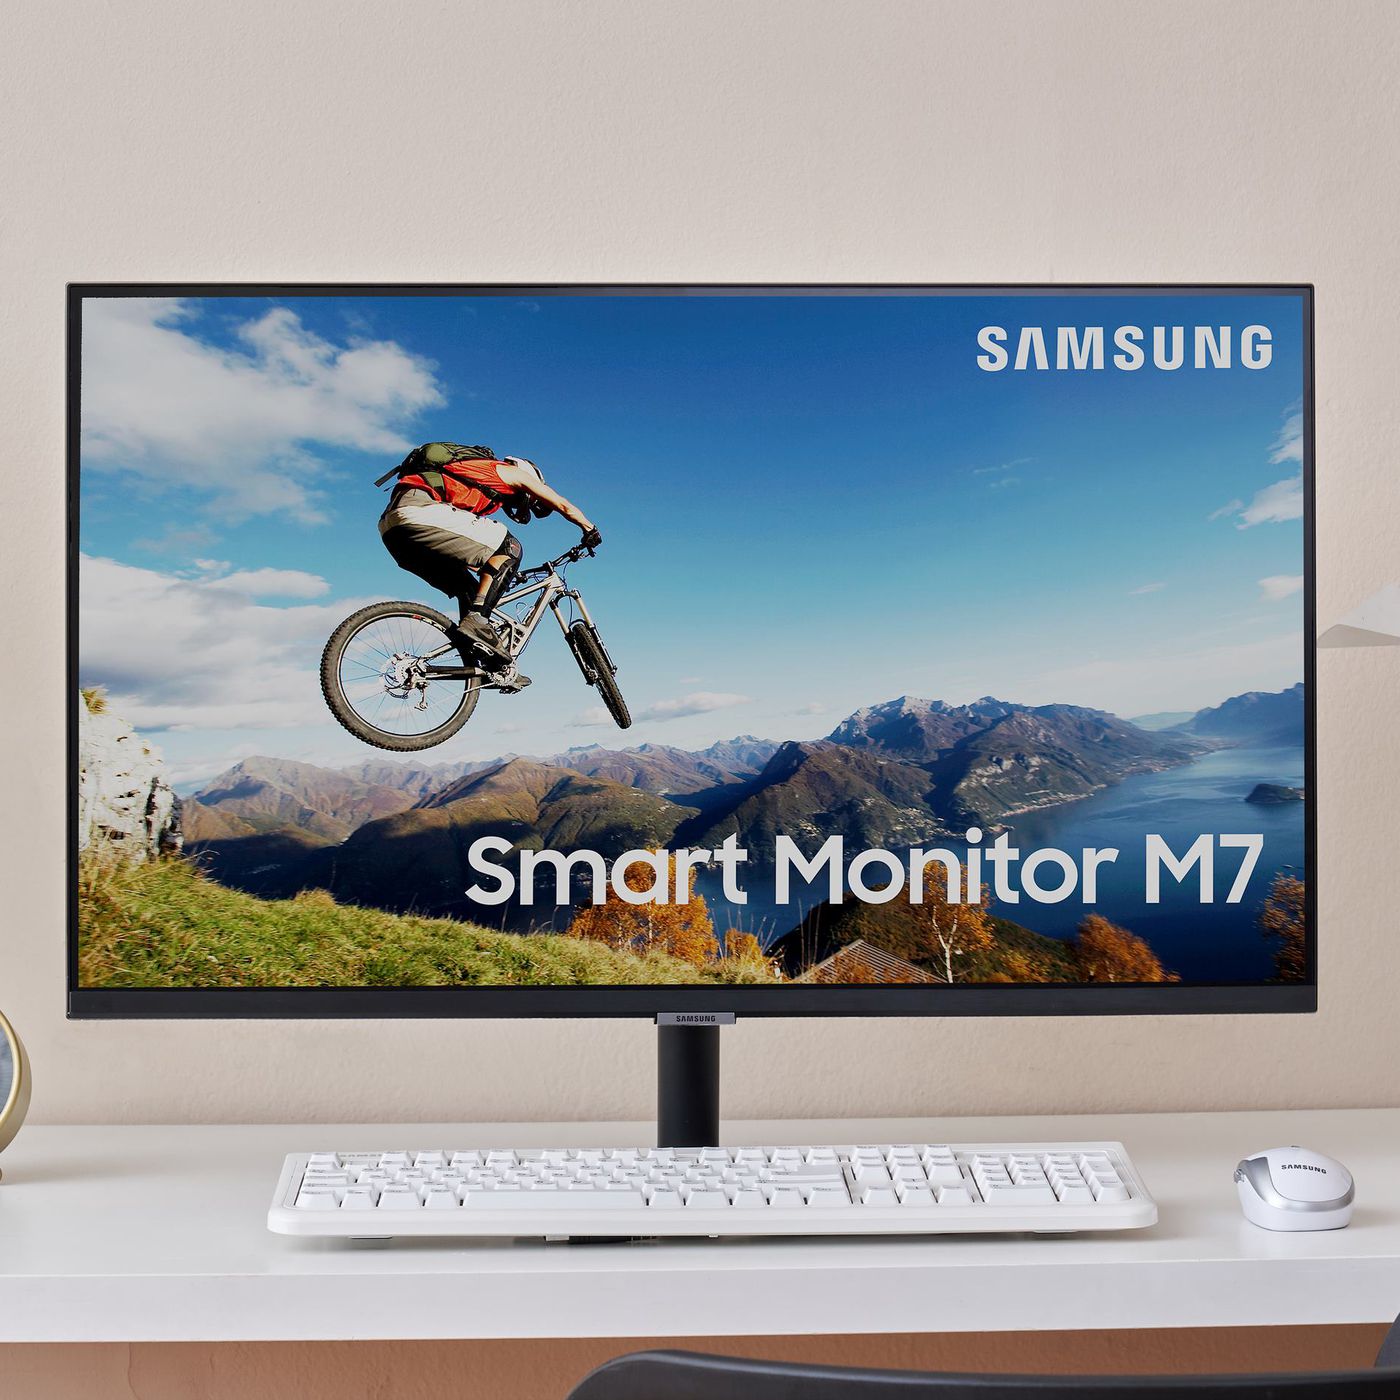 Samsung S Smart Monitor Can Stream Tv Apps Supports Airplay 2 And More The Verge